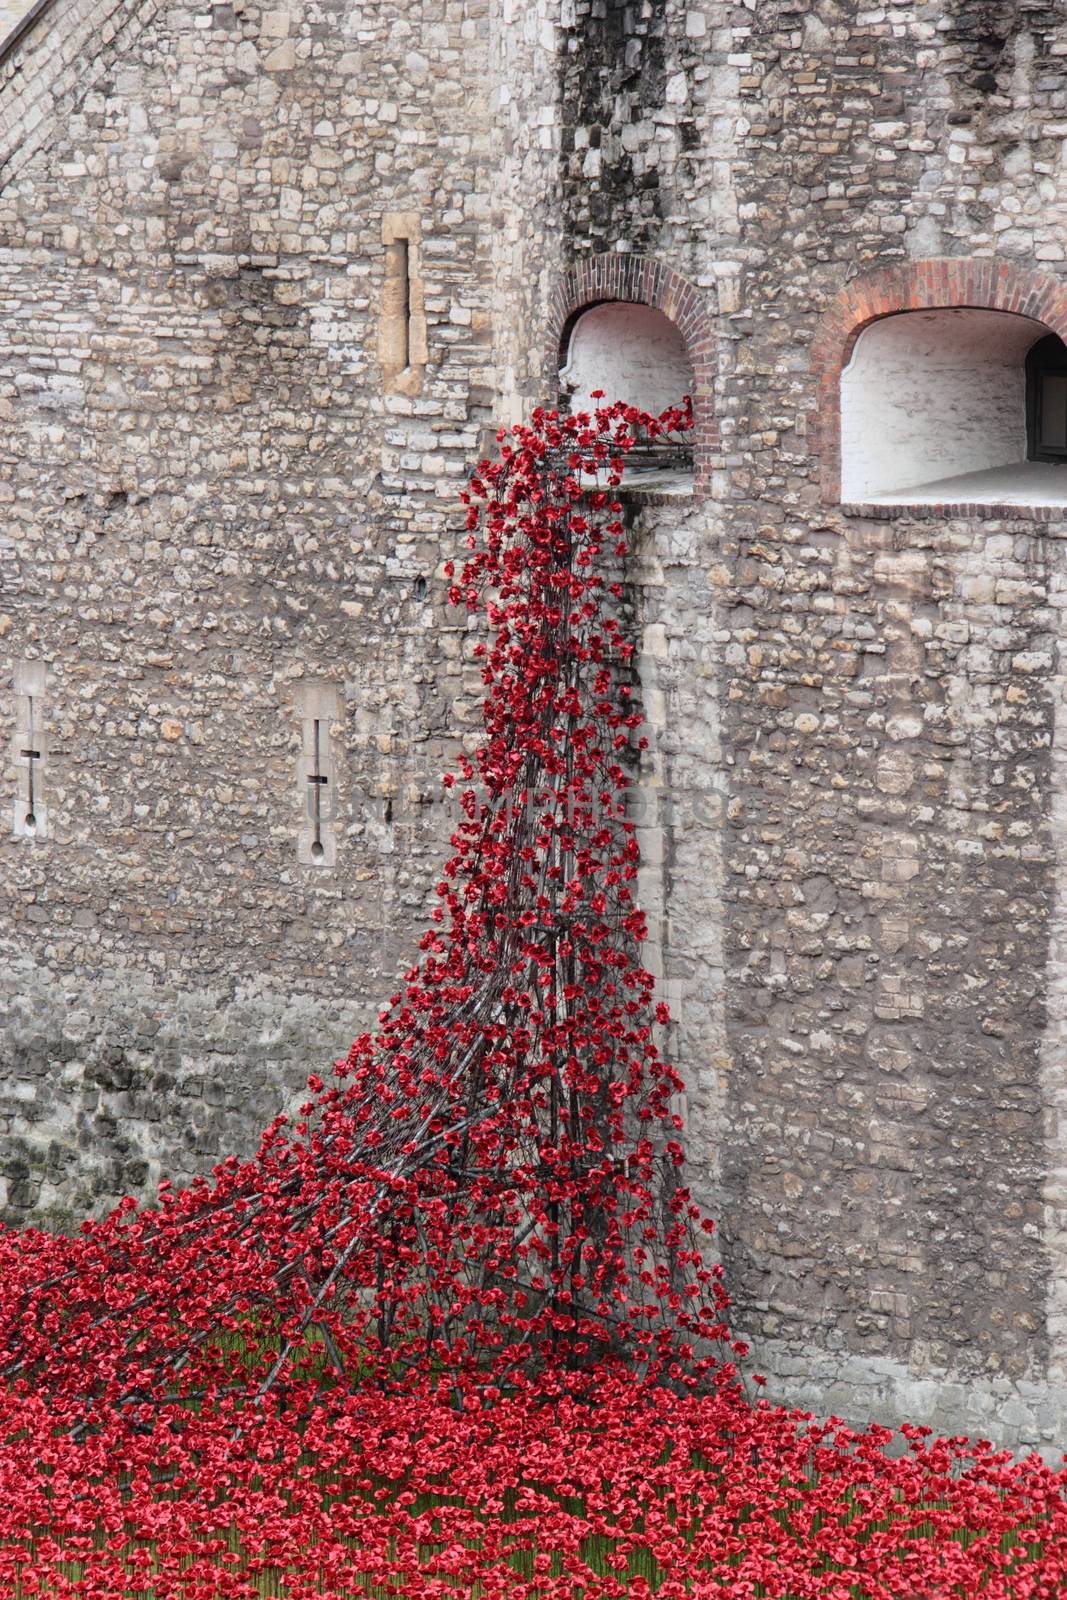 Poppies at The Tower of London London UK